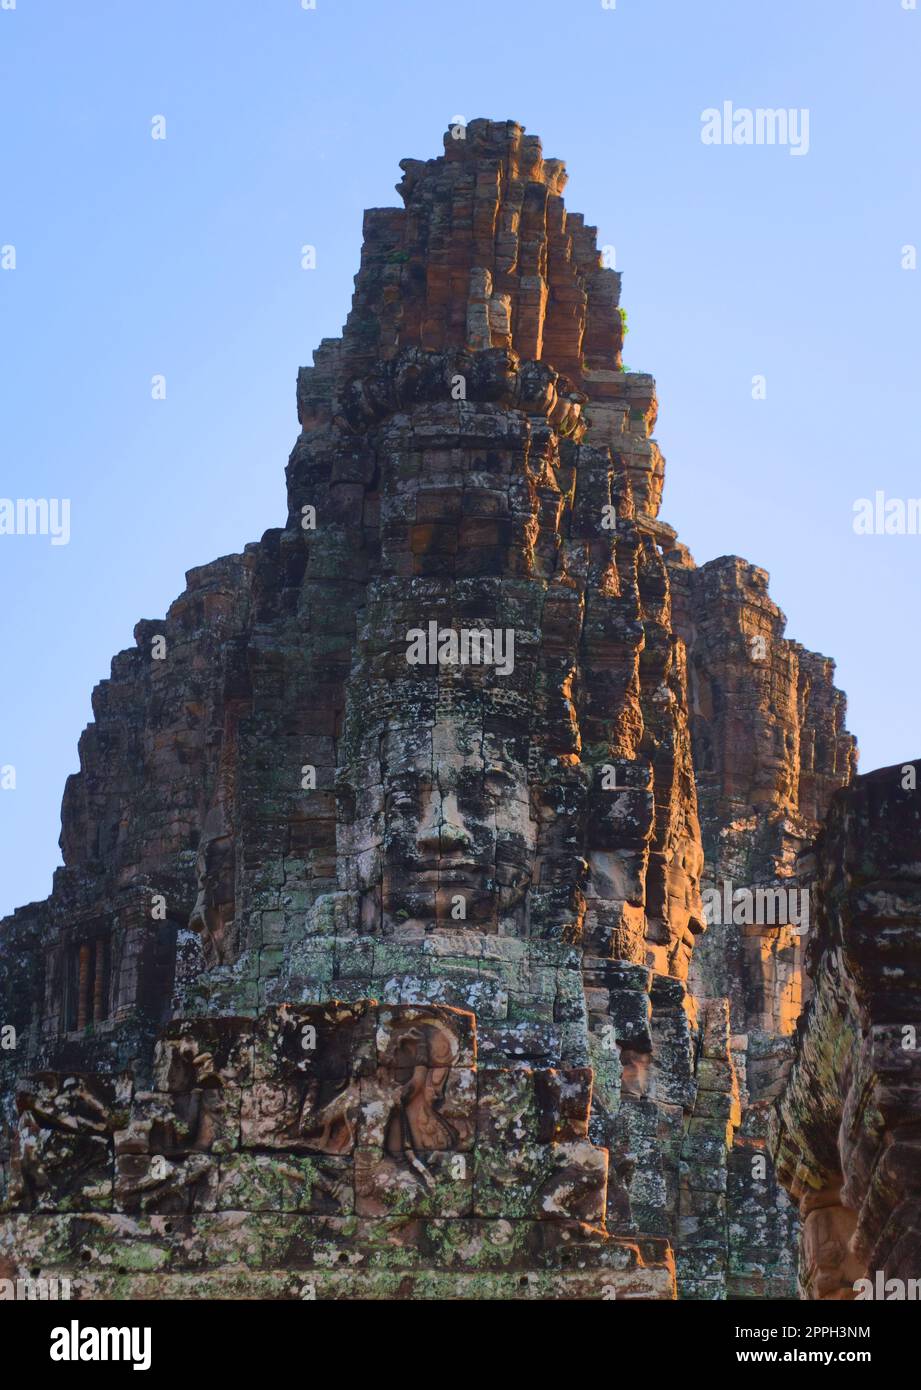 Stone face tower on the Bayon temple, located in Angkor, Cambodia, the ancient capital of the Khmer empire. Stock Photo